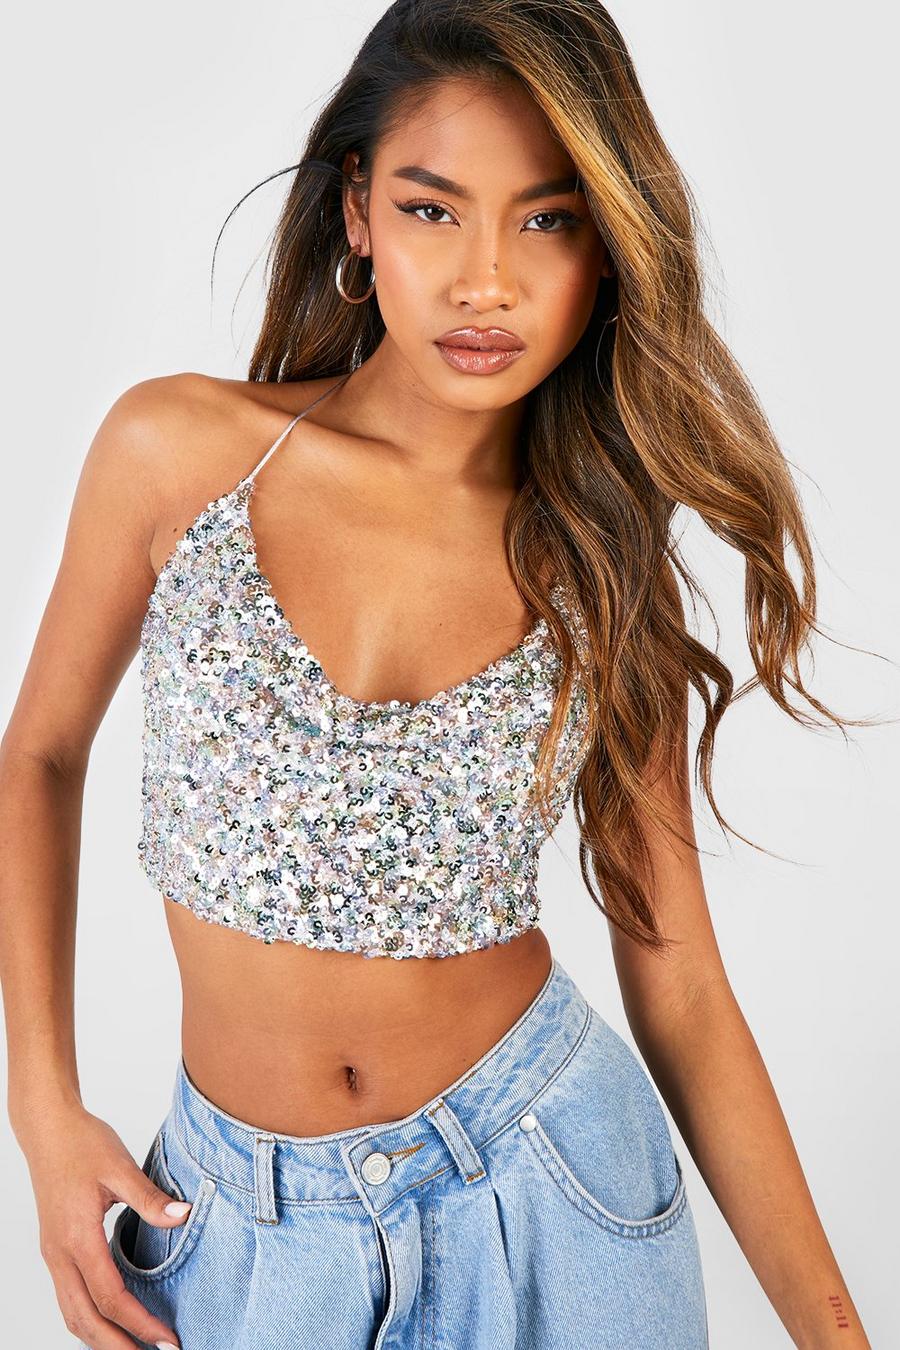 Sparkly Sequin Top For Women Party Strappy Tank Top